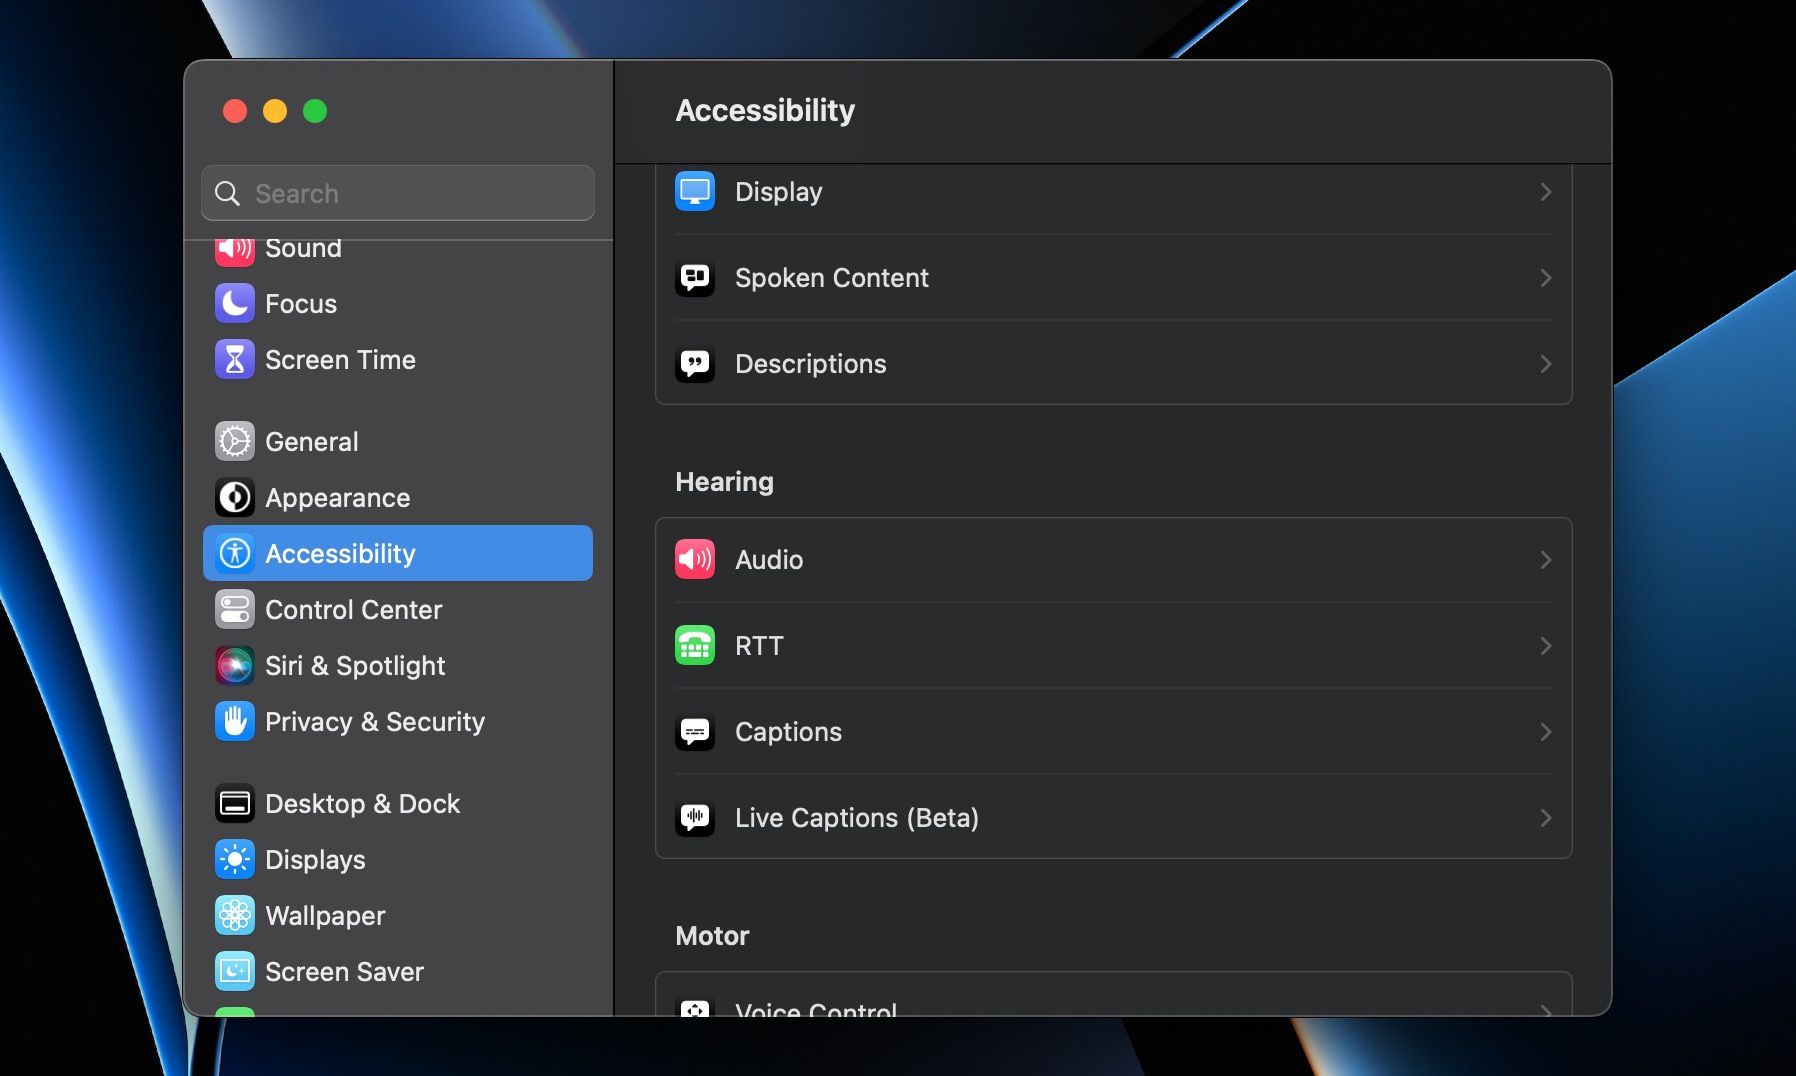 Go to System Settings > Accessibility > Audio on your Mac